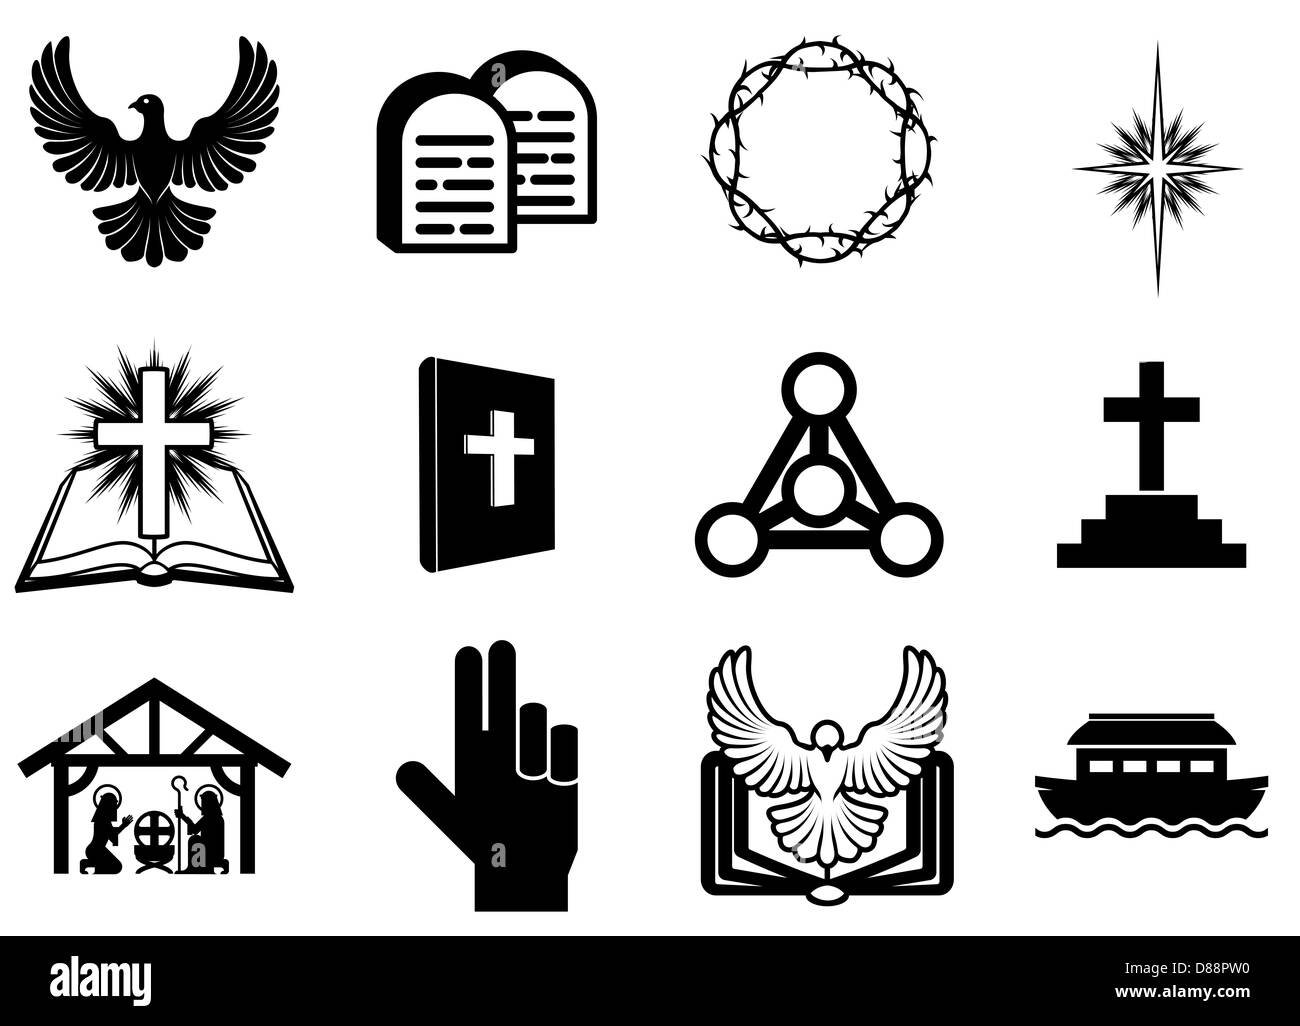 Set of Christian religious icons, signs and symbols Stock Photo